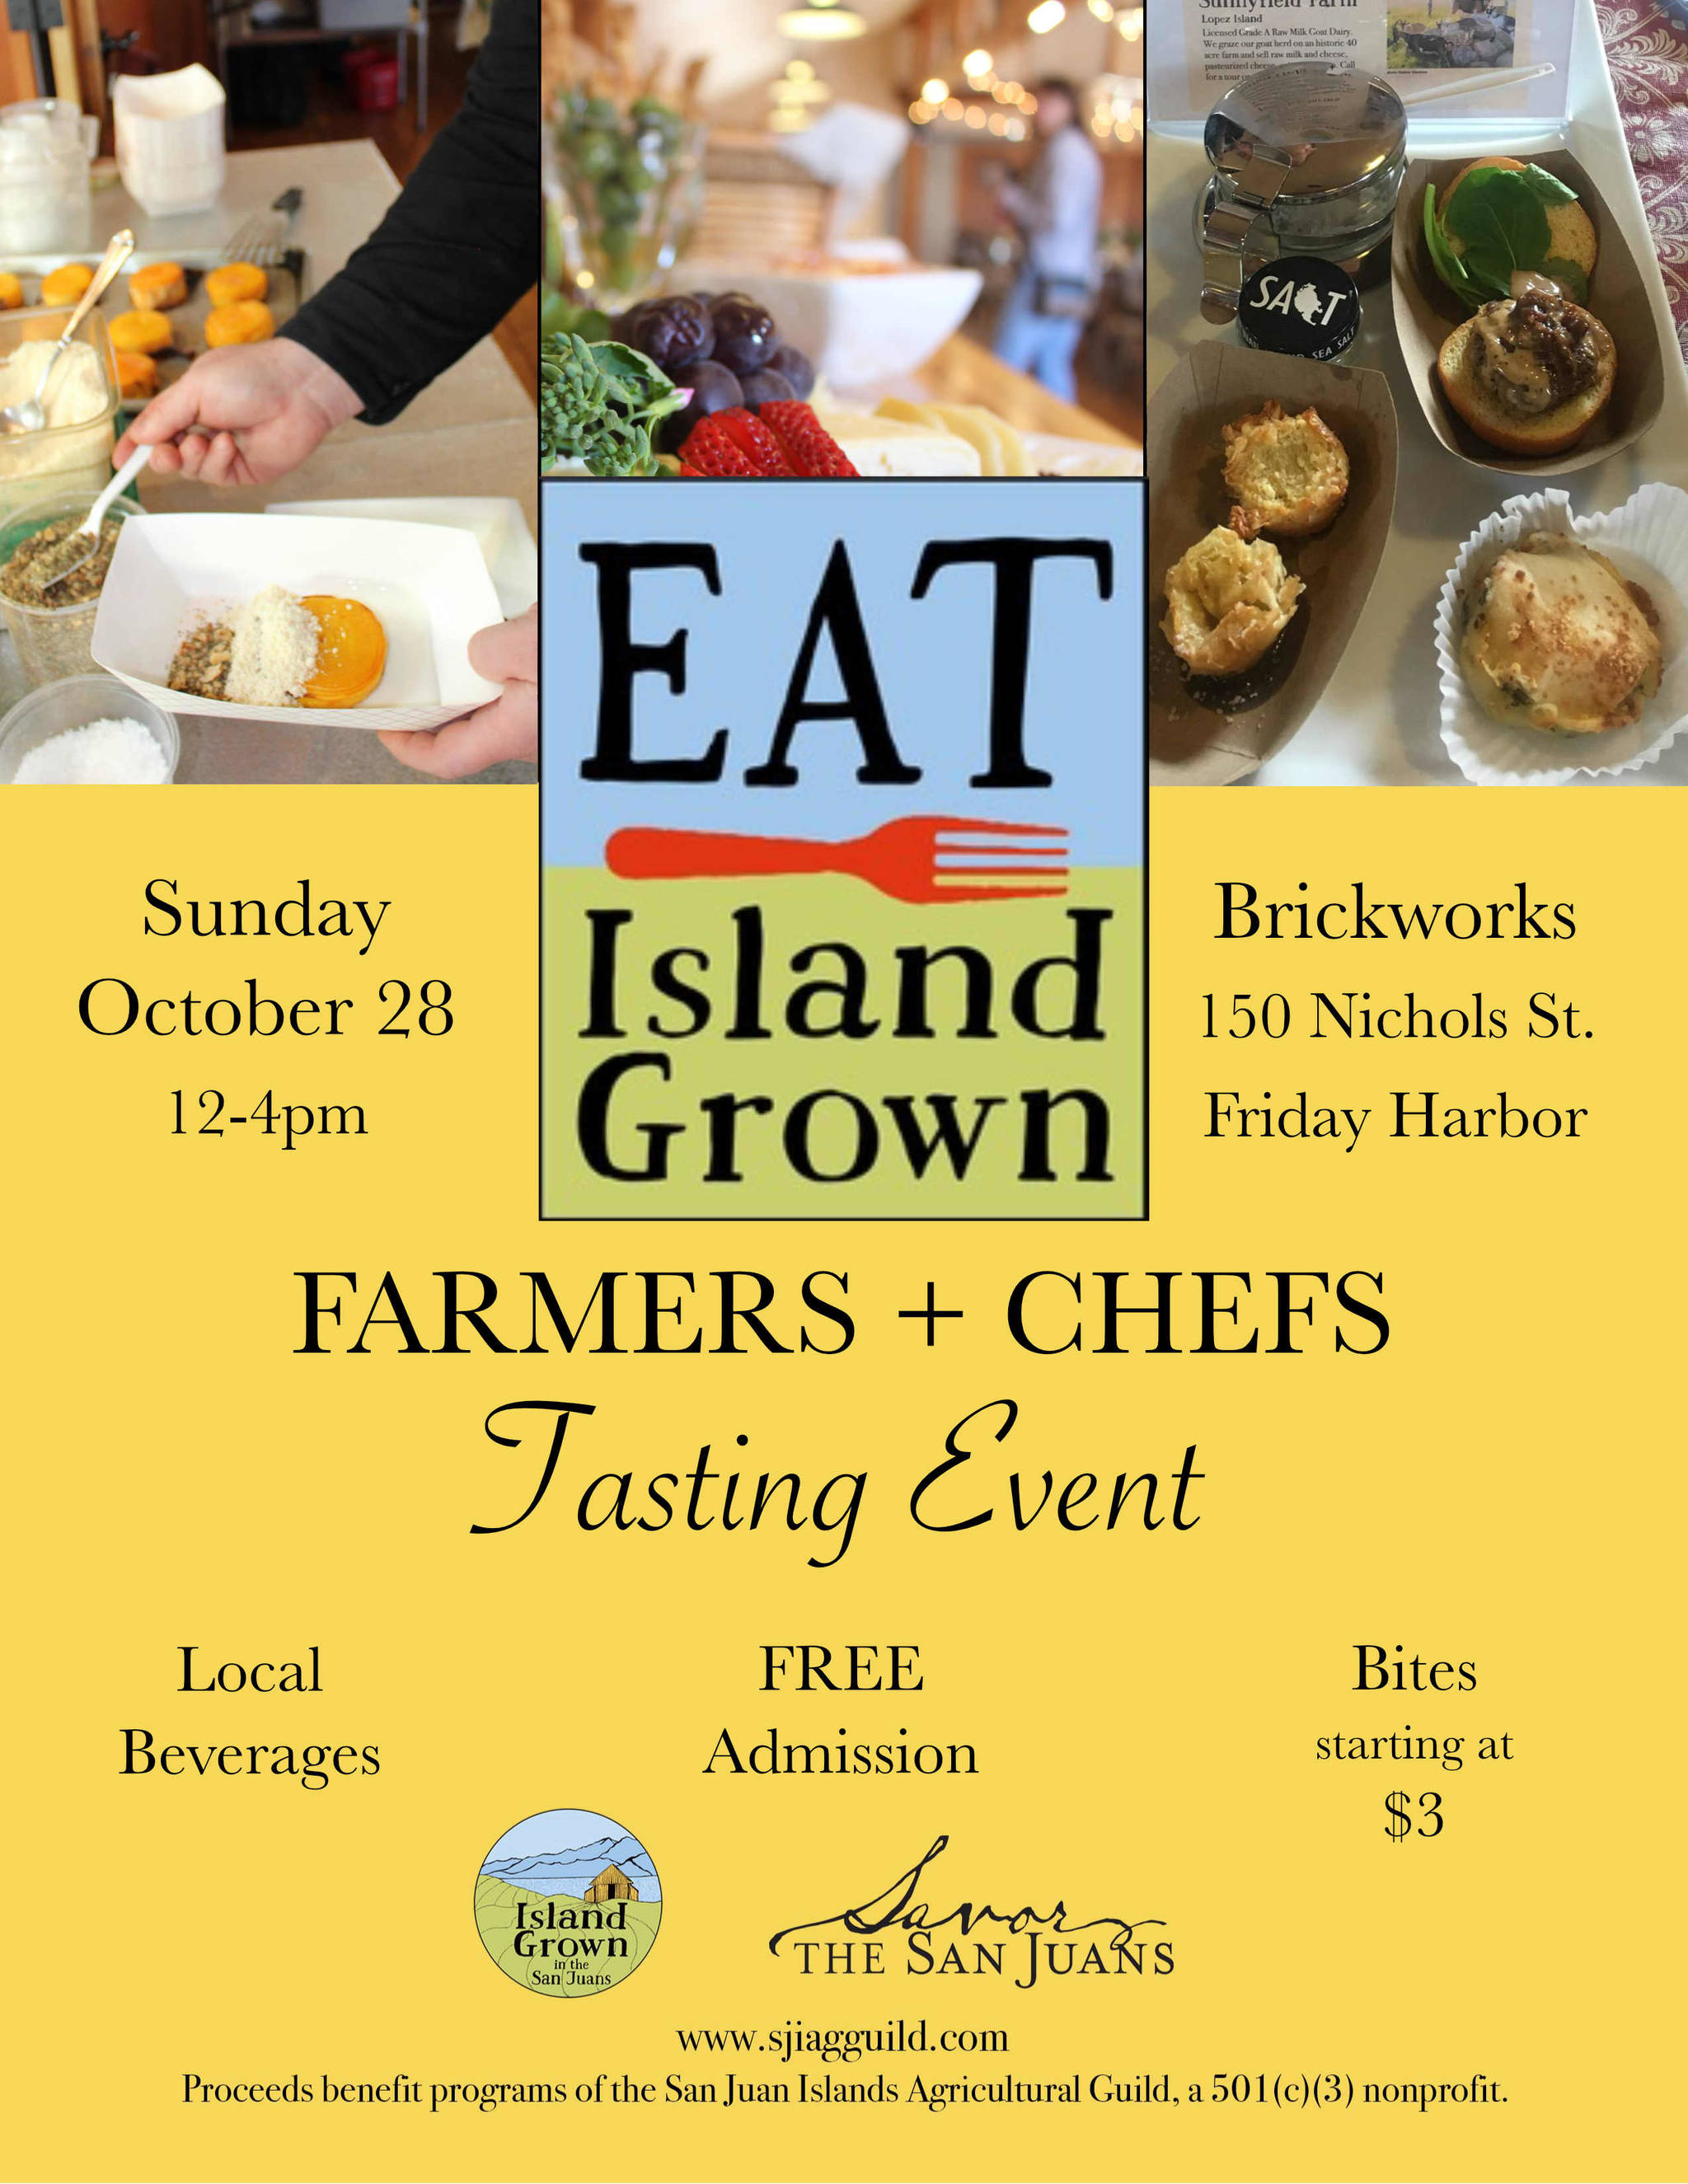 Celebrate local food at “Eat Island Grown” | The Journal of the San